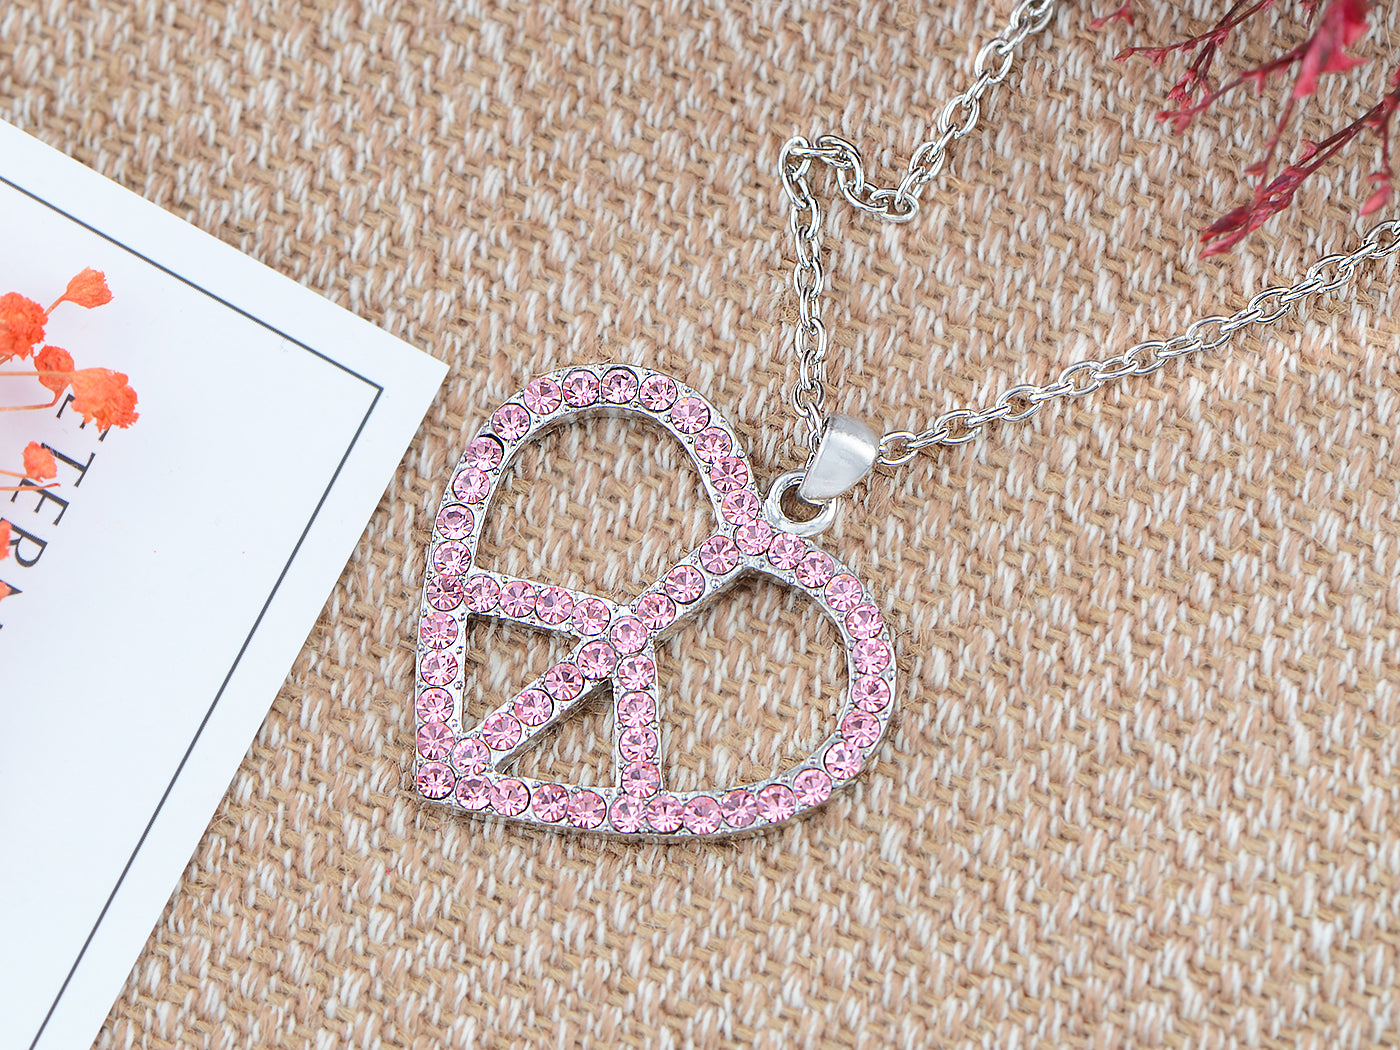 Pink Heart Peace Sign Symbol Pendant Necklace